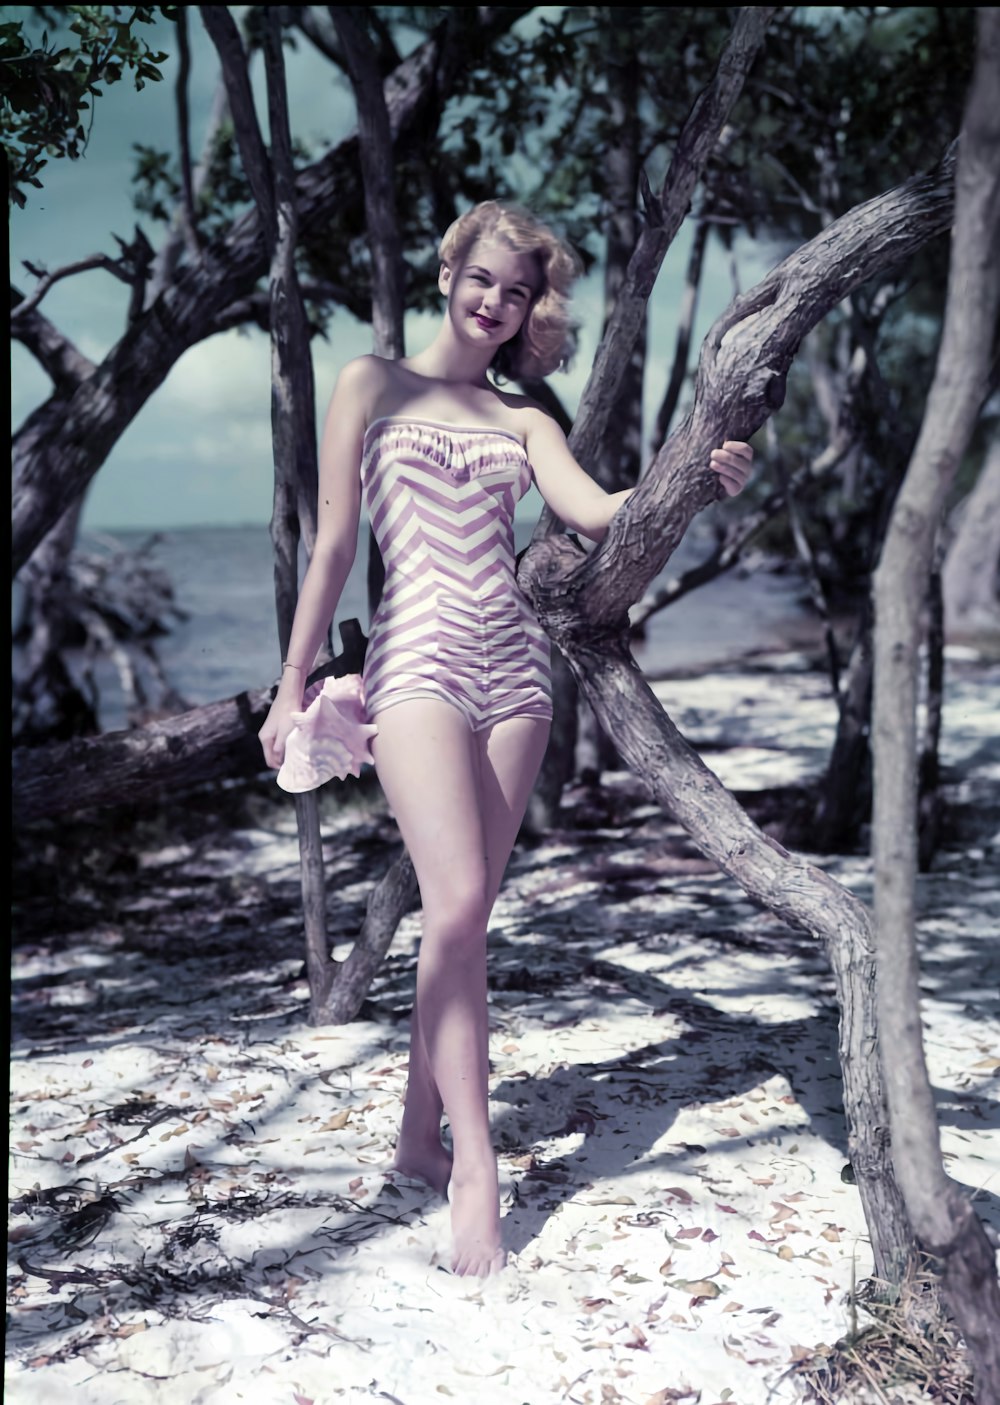 a woman in a bathing suit standing next to a tree